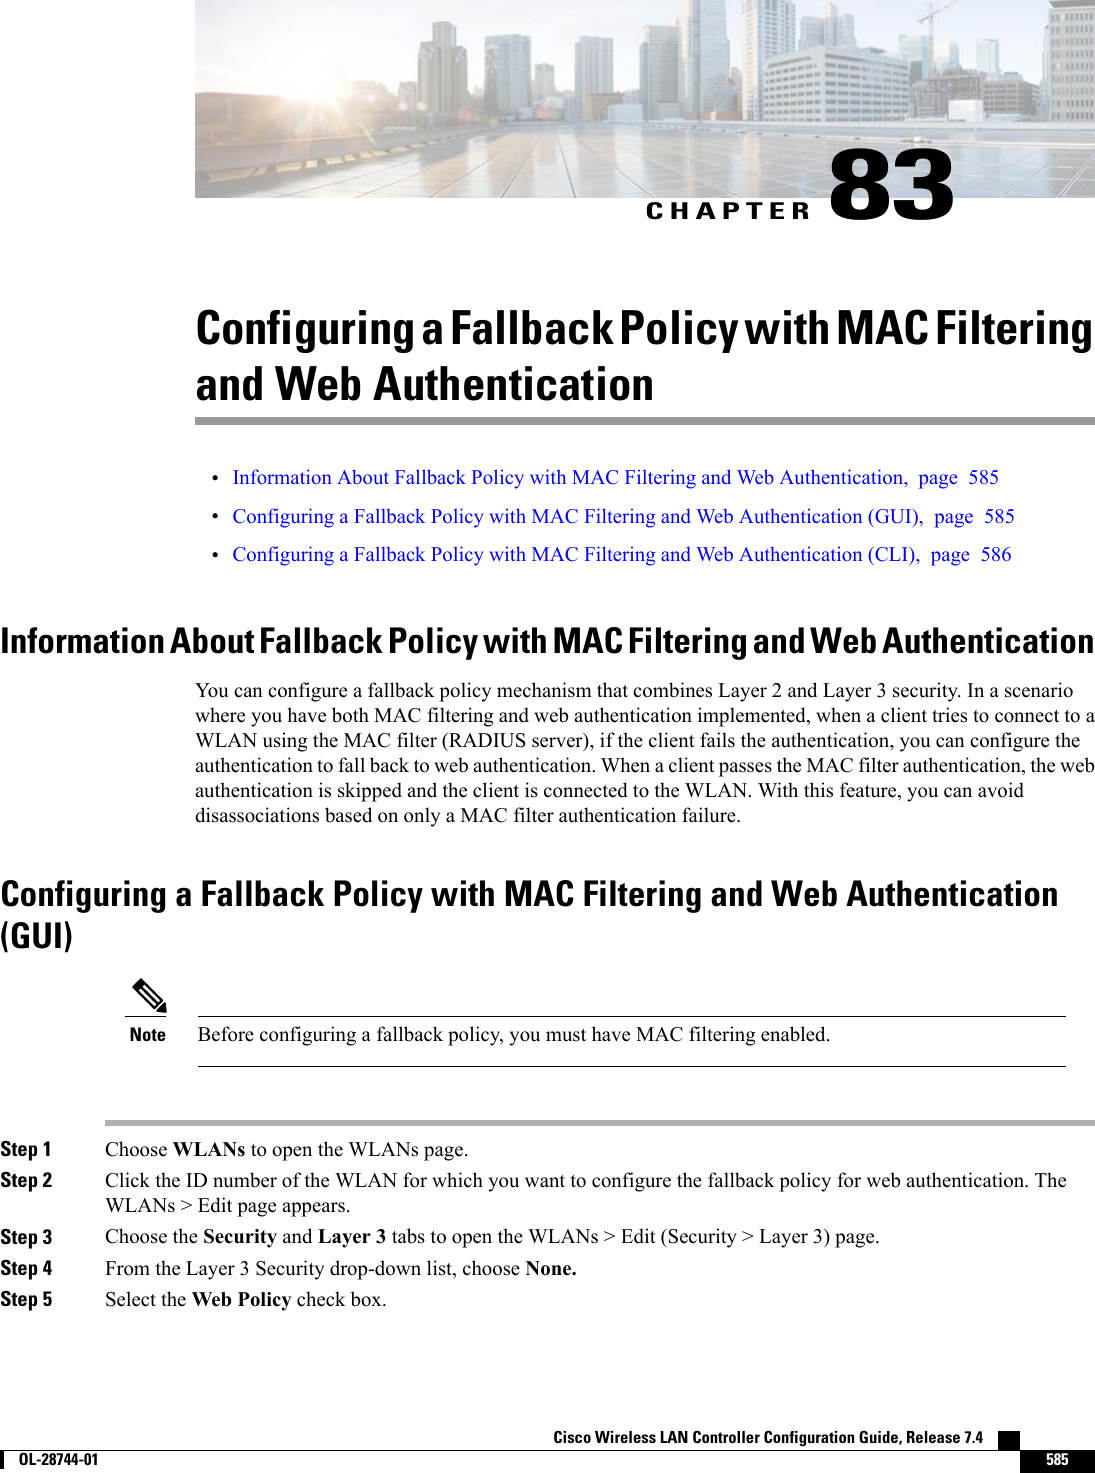 CHAPTER 83Configuring a Fallback Policy with MAC Filteringand Web Authentication•Information About Fallback Policy with MAC Filtering and Web Authentication, page 585•Configuring a Fallback Policy with MAC Filtering and Web Authentication (GUI), page 585•Configuring a Fallback Policy with MAC Filtering and Web Authentication (CLI), page 586Information About Fallback Policy with MAC Filtering and Web AuthenticationYou can configure a fallback policy mechanism that combines Layer 2 and Layer 3 security. In a scenariowhere you have both MAC filtering and web authentication implemented, when a client tries to connect to aWLAN using the MAC filter (RADIUS server), if the client fails the authentication, you can configure theauthentication to fall back to web authentication. When a client passes the MAC filter authentication, the webauthentication is skipped and the client is connected to the WLAN. With this feature, you can avoiddisassociations based on only a MAC filter authentication failure.Configuring a Fallback Policy with MAC Filtering and Web Authentication(GUI)Before configuring a fallback policy, you must have MAC filtering enabled.NoteStep 1 Choose WLANs to open the WLANs page.Step 2 Click the ID number of the WLAN for which you want to configure the fallback policy for web authentication. TheWLANs &gt; Edit page appears.Step 3 Choose the Security and Layer 3 tabs to open the WLANs &gt; Edit (Security &gt; Layer 3) page.Step 4 From the Layer 3 Security drop-down list, choose None.Step 5 Select the Web Policy check box.Cisco Wireless LAN Controller Configuration Guide, Release 7.4        OL-28744-01 585